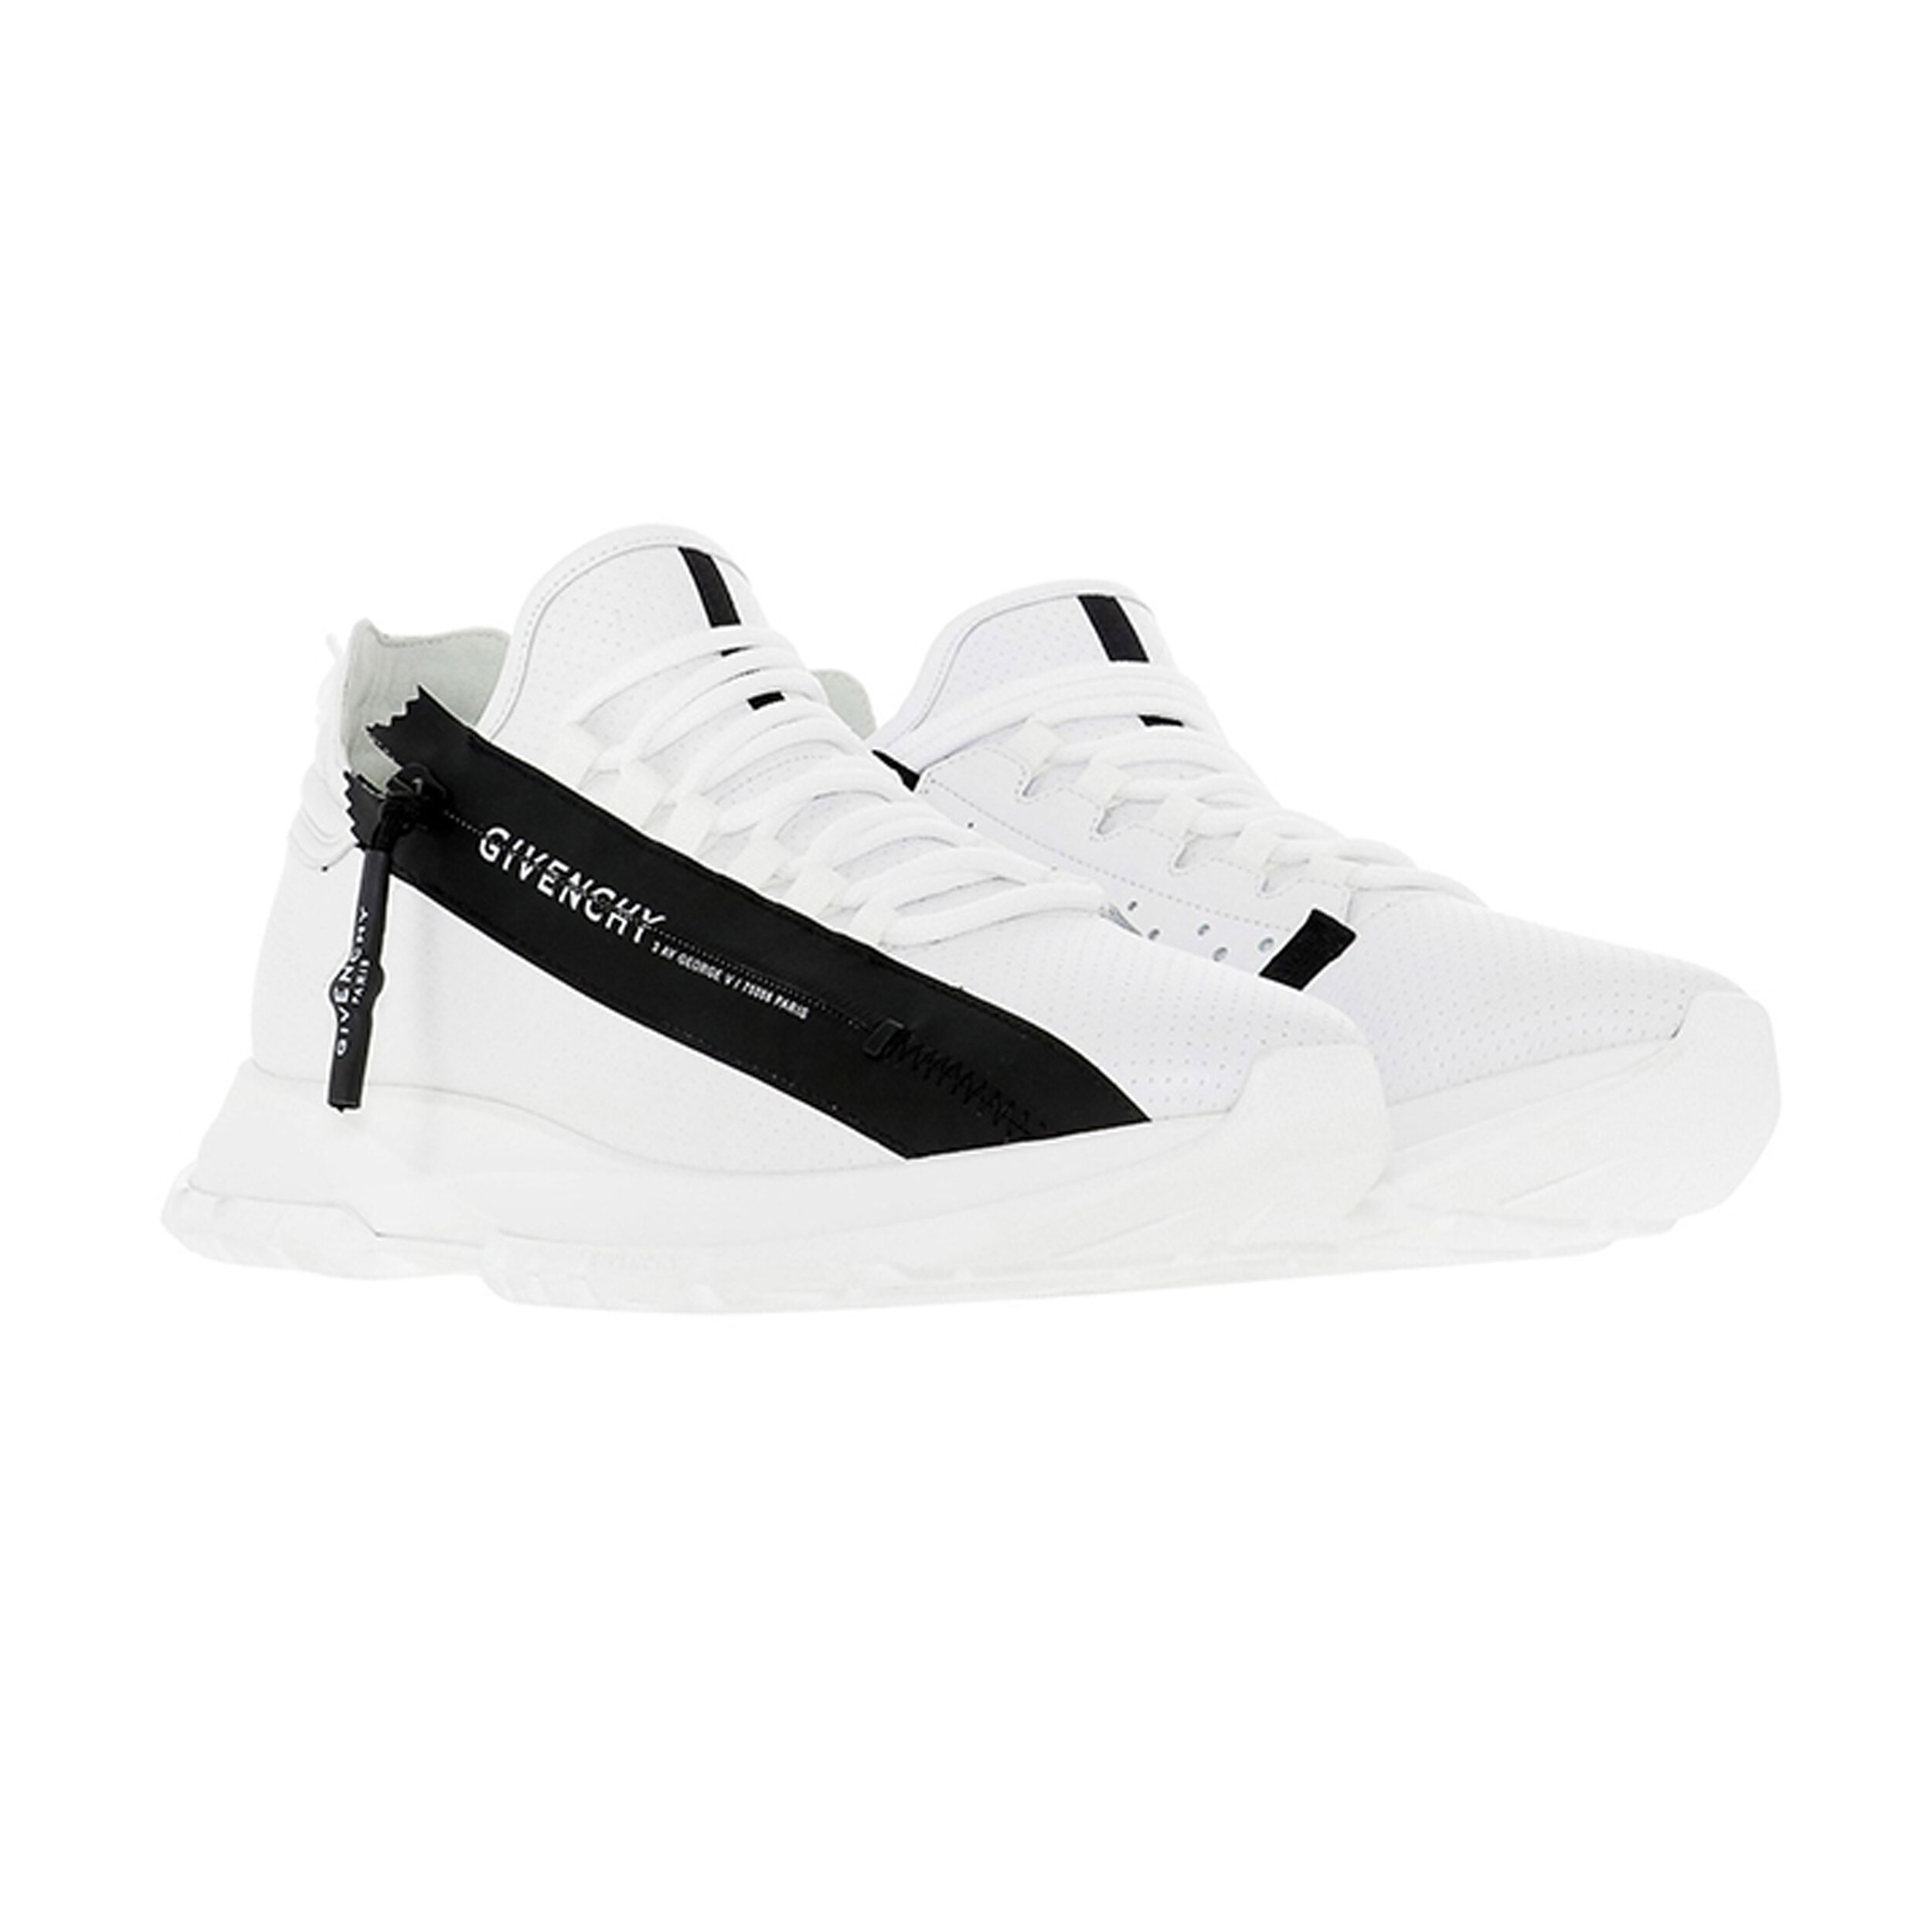  Spectre Runner Sneakers in White, Givenchy P48,500 